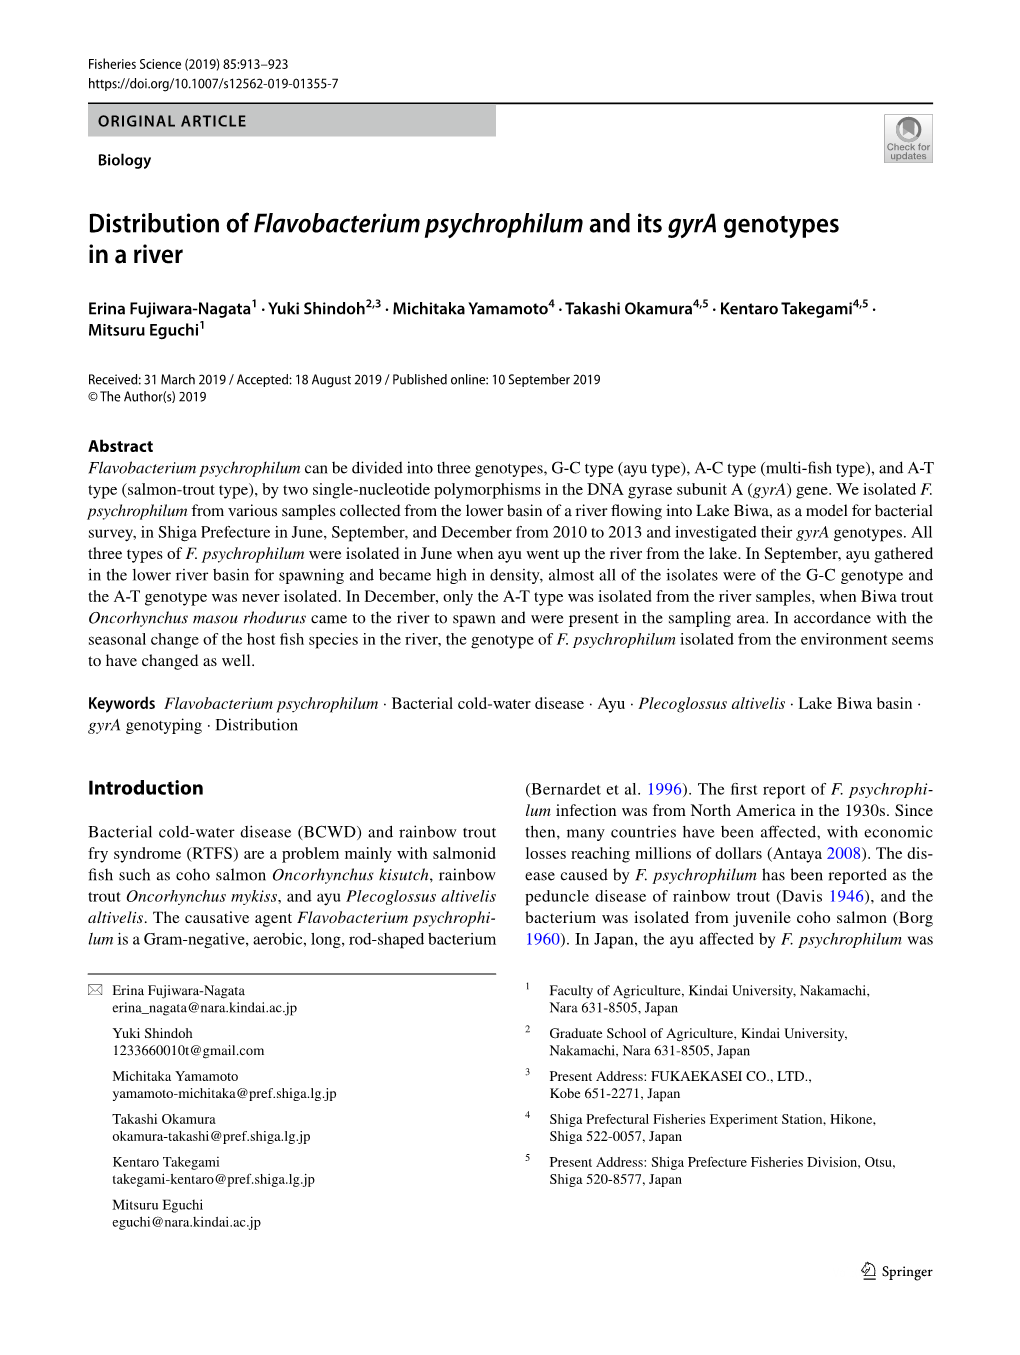 Distribution of Flavobacterium Psychrophilum and Its Gyra Genotypes in a River